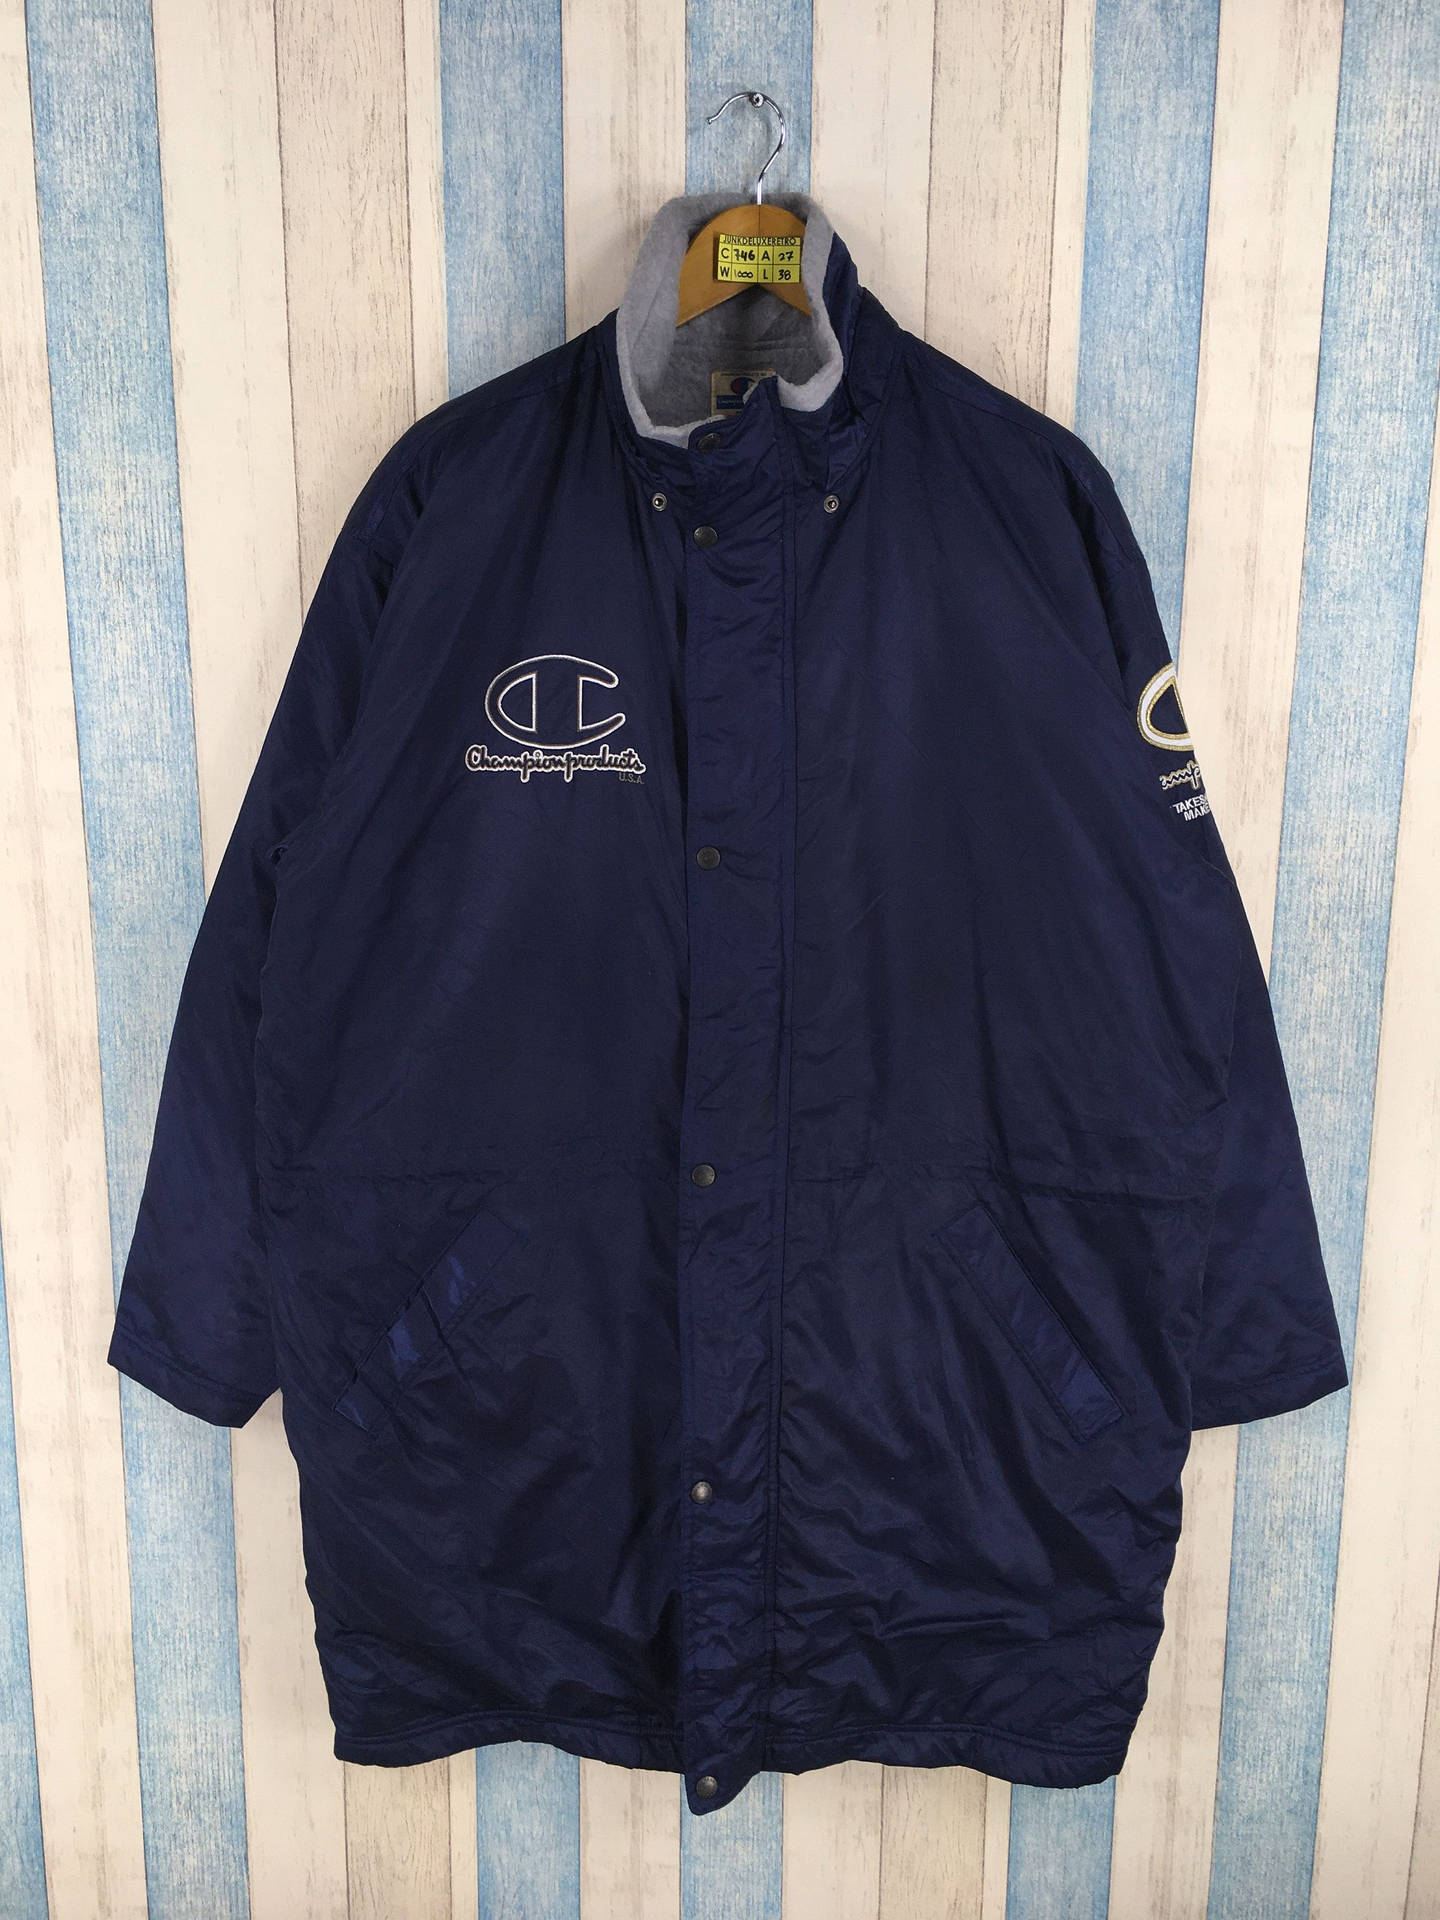 Champion Blue Windbreaker: Swag Meets Functionality Background